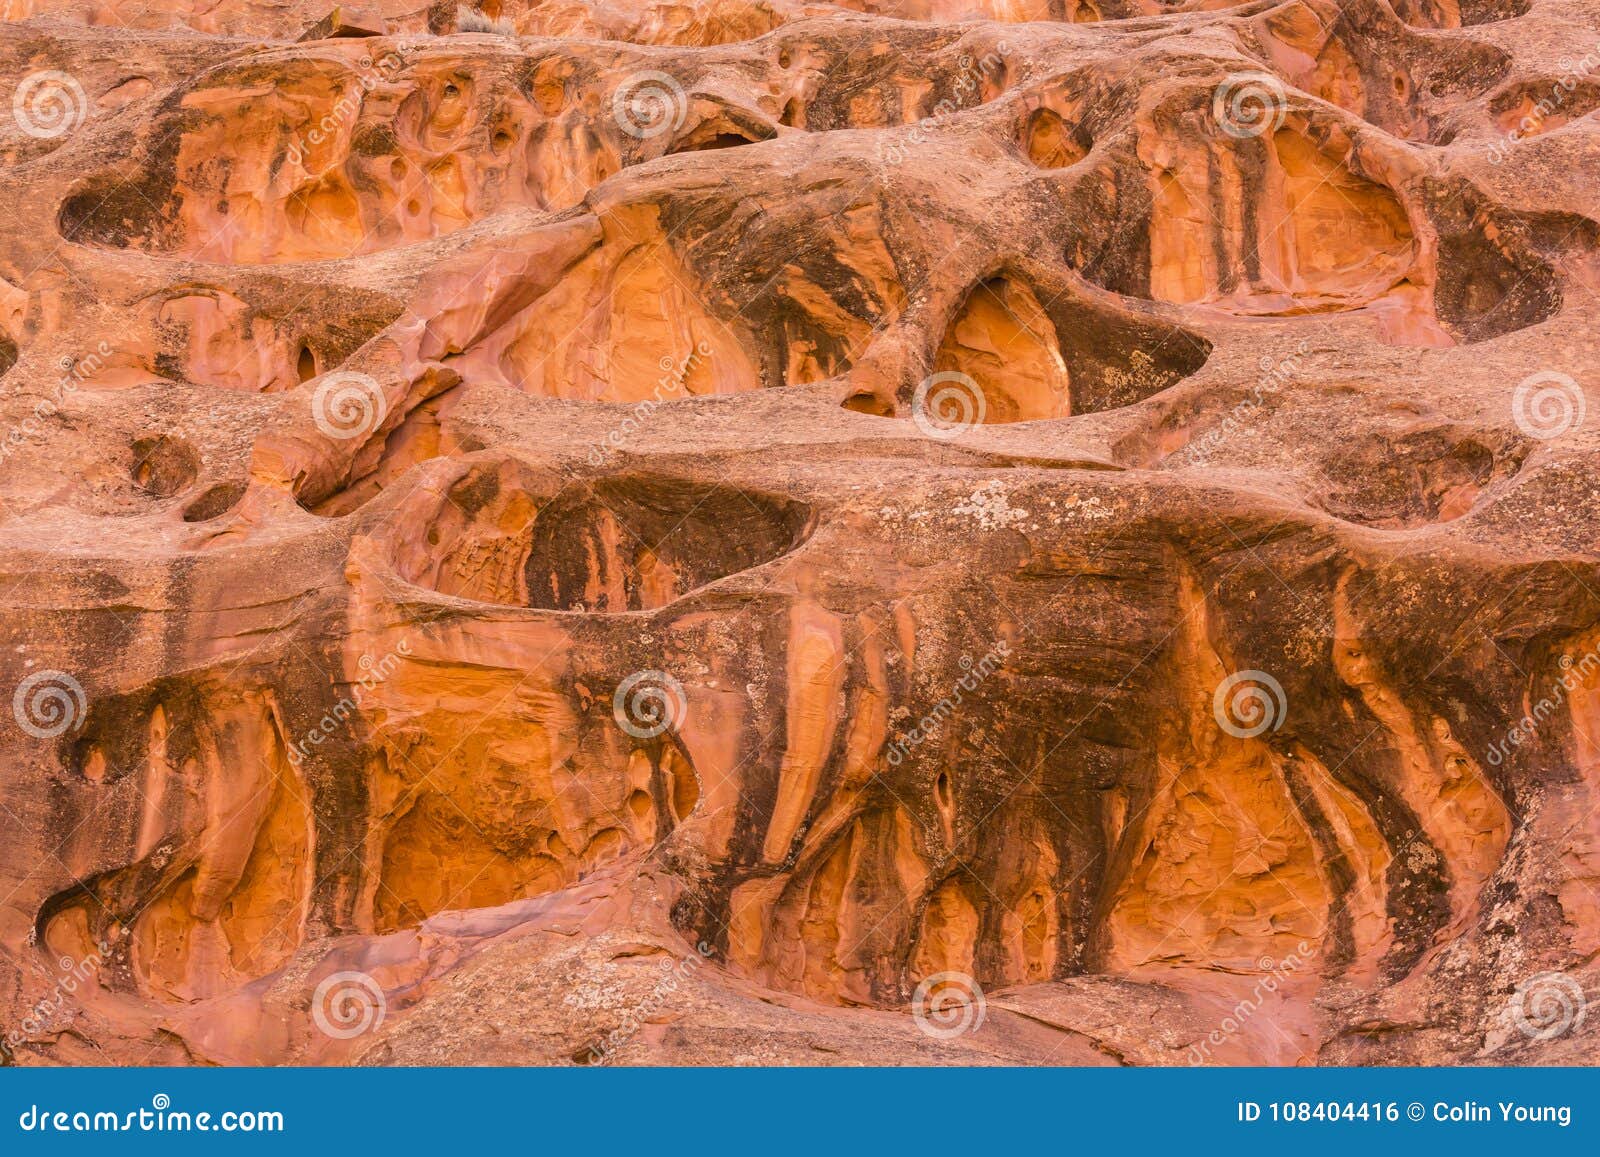 Long Canyon Red Rock Swiss Cheese Stock Photo - Image of geology